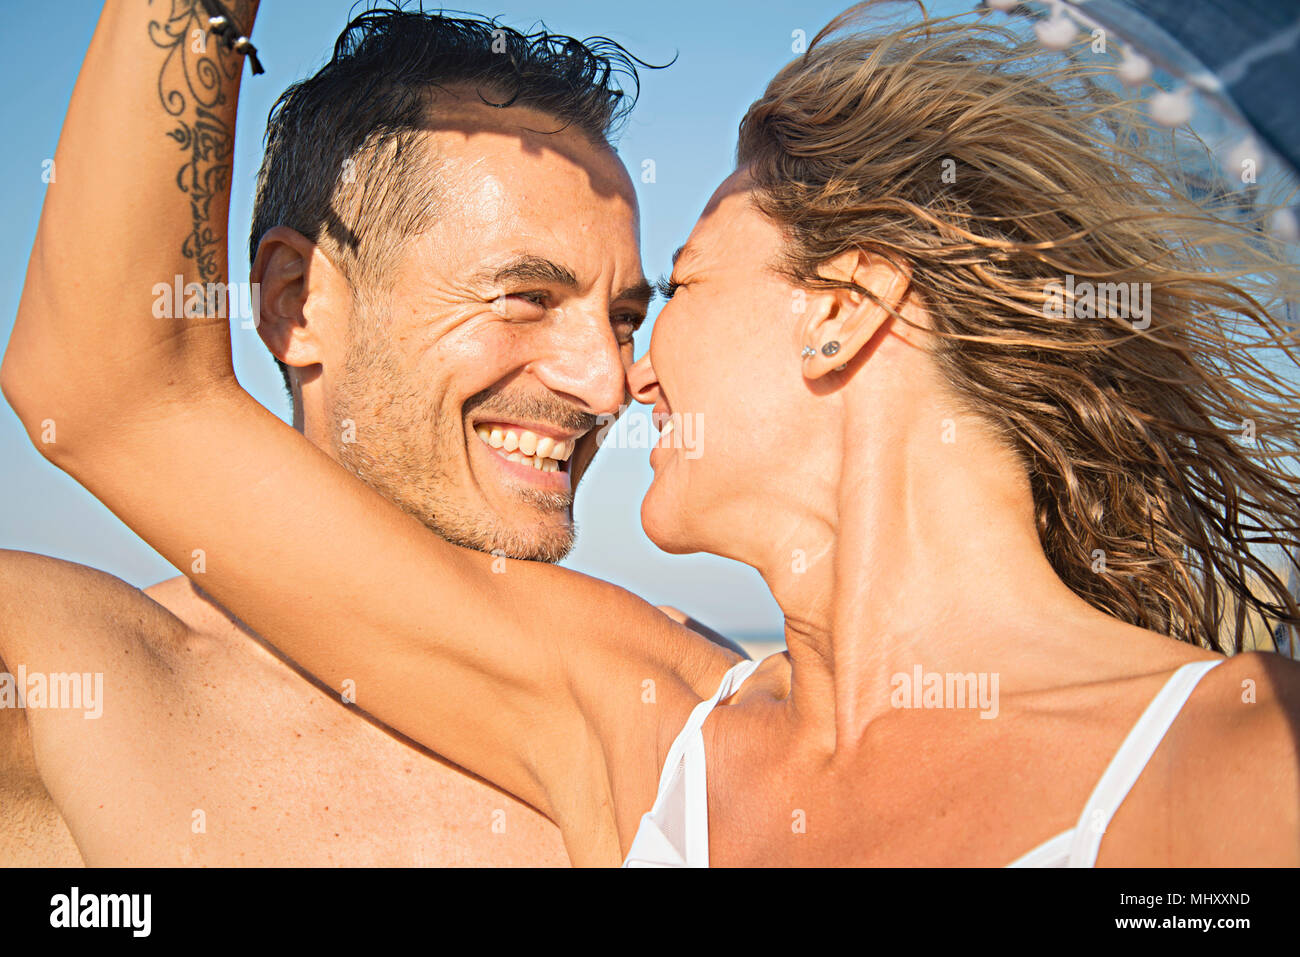 Mature couple on beach, face to face, smiling Stock Photo